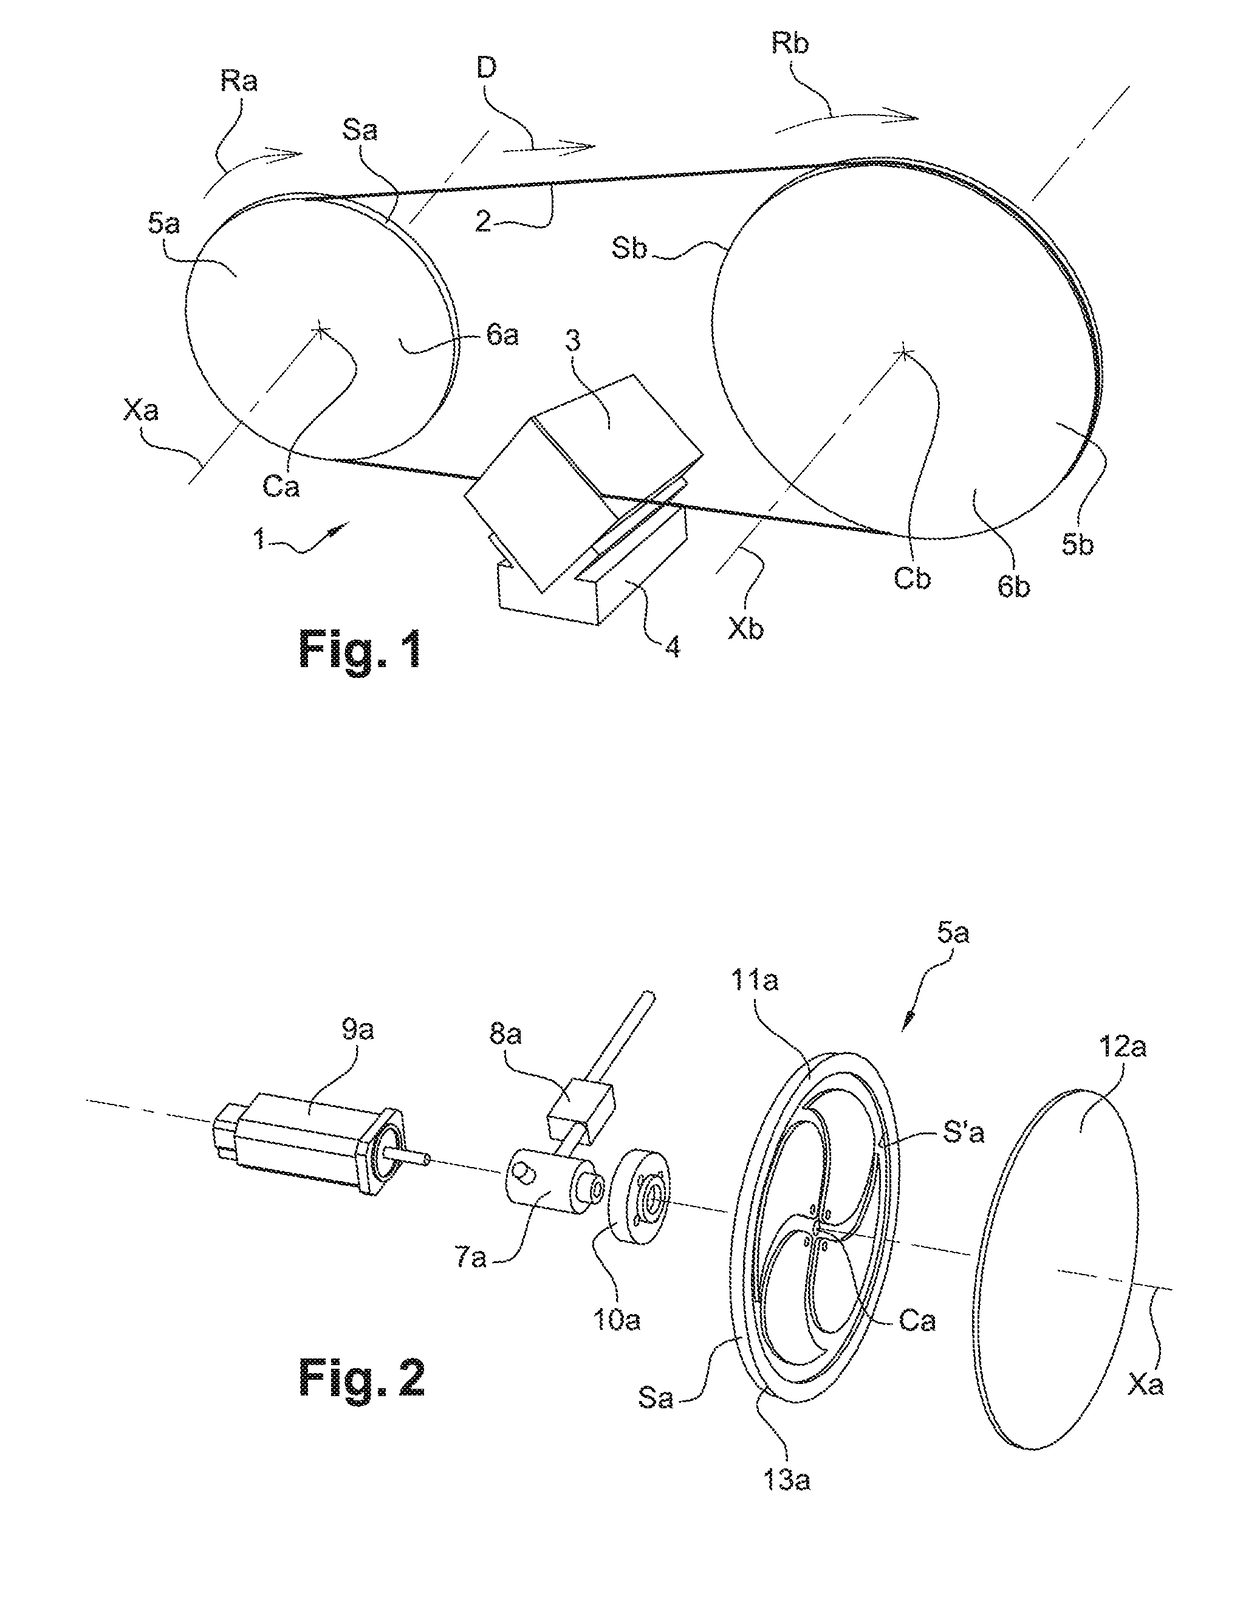 Wire cutting device comprising a rotary member provided with means for lubrication of the wire